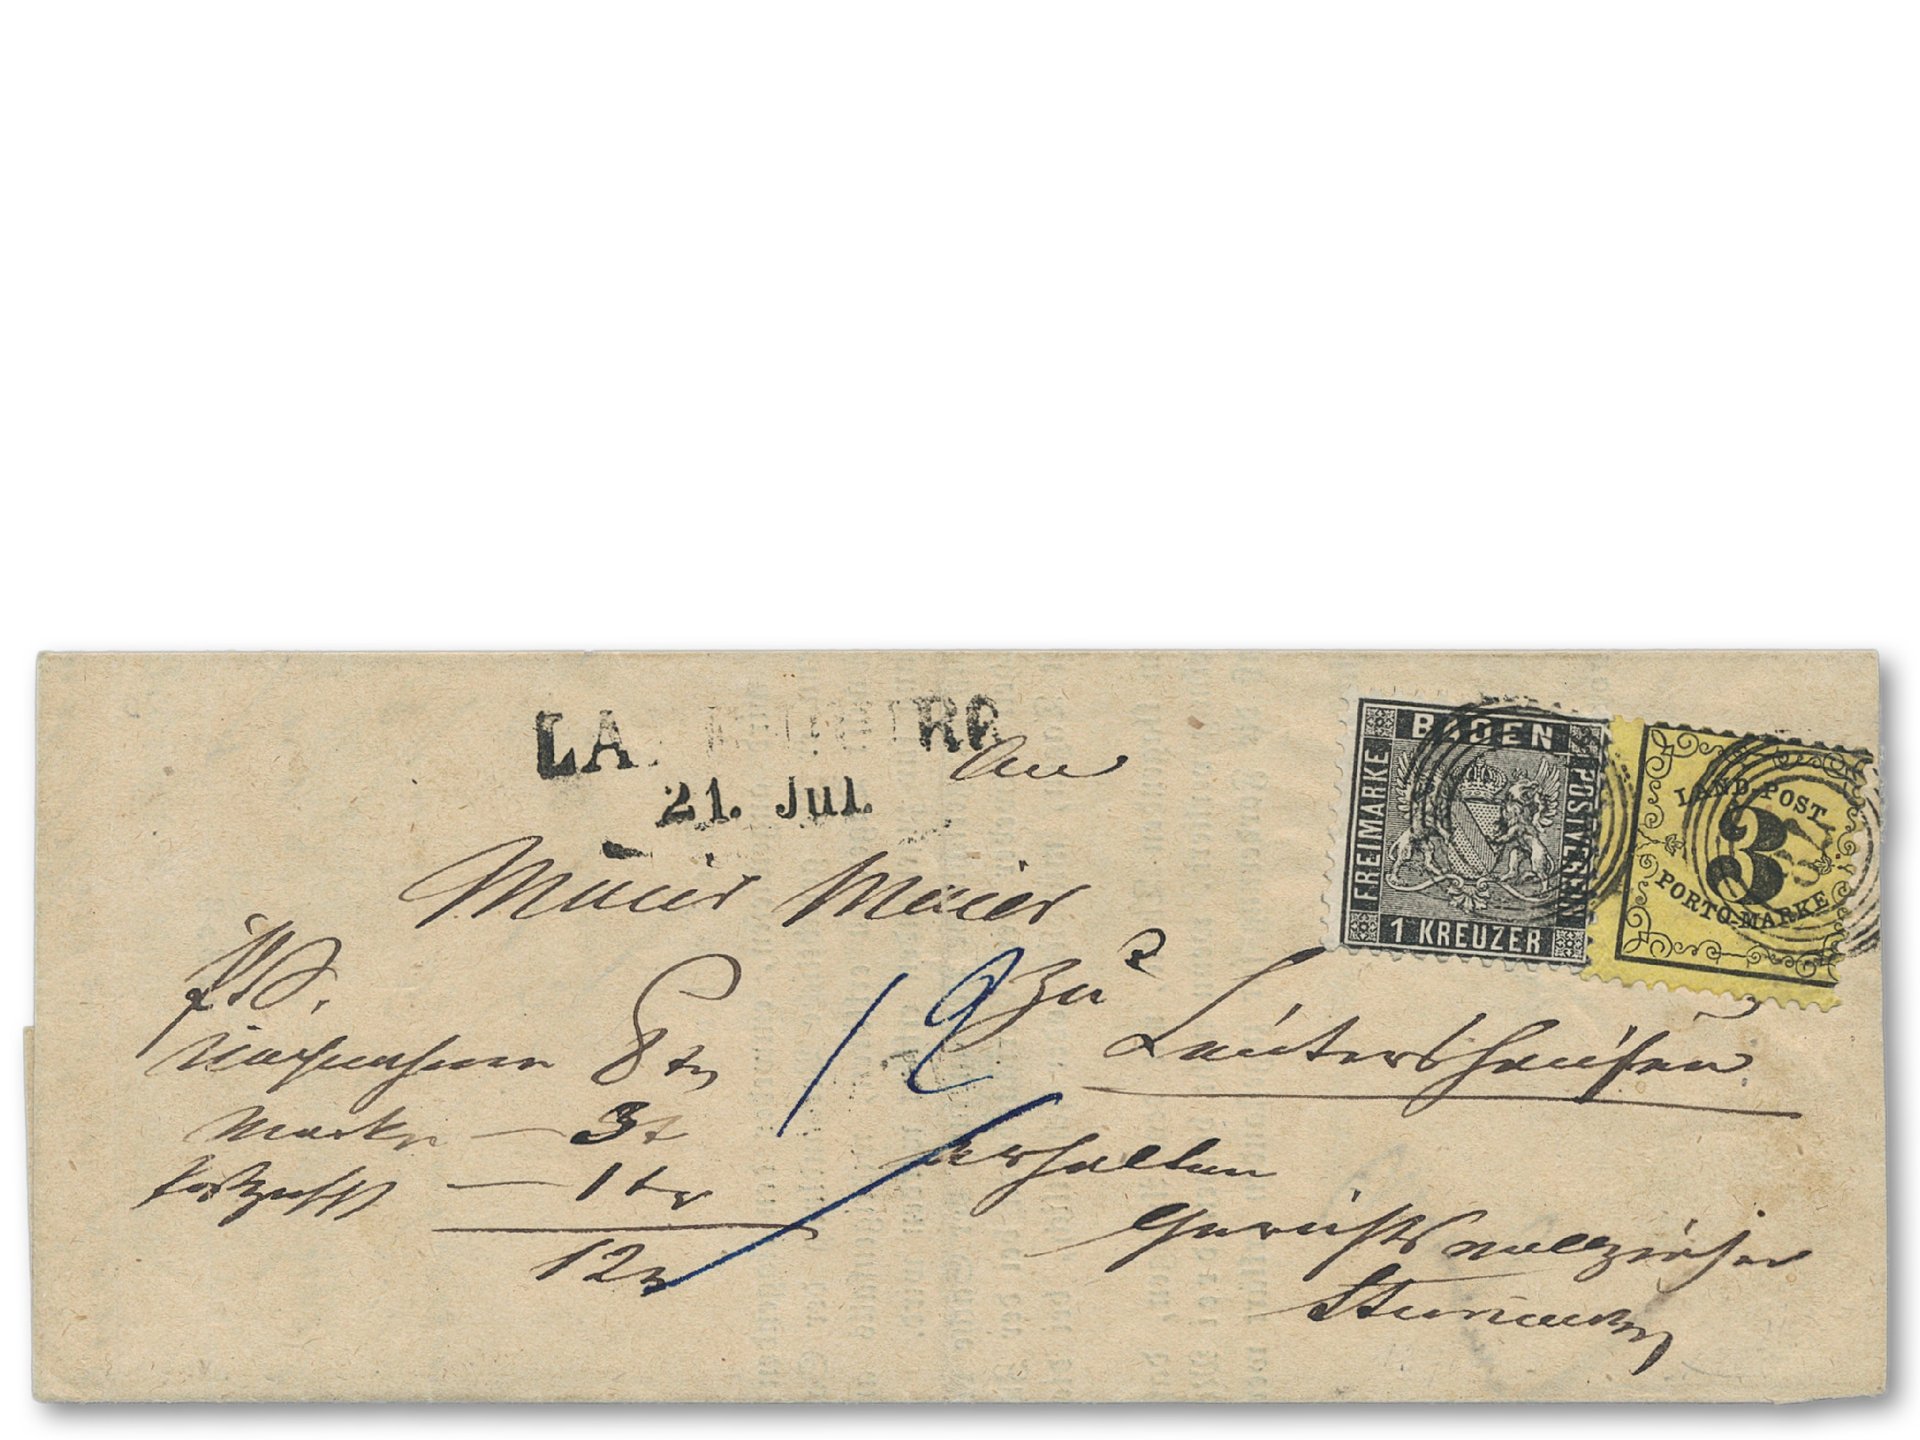 Cash on delivery cover from 1864 franked with mixed franking from land mail and postage stamps.